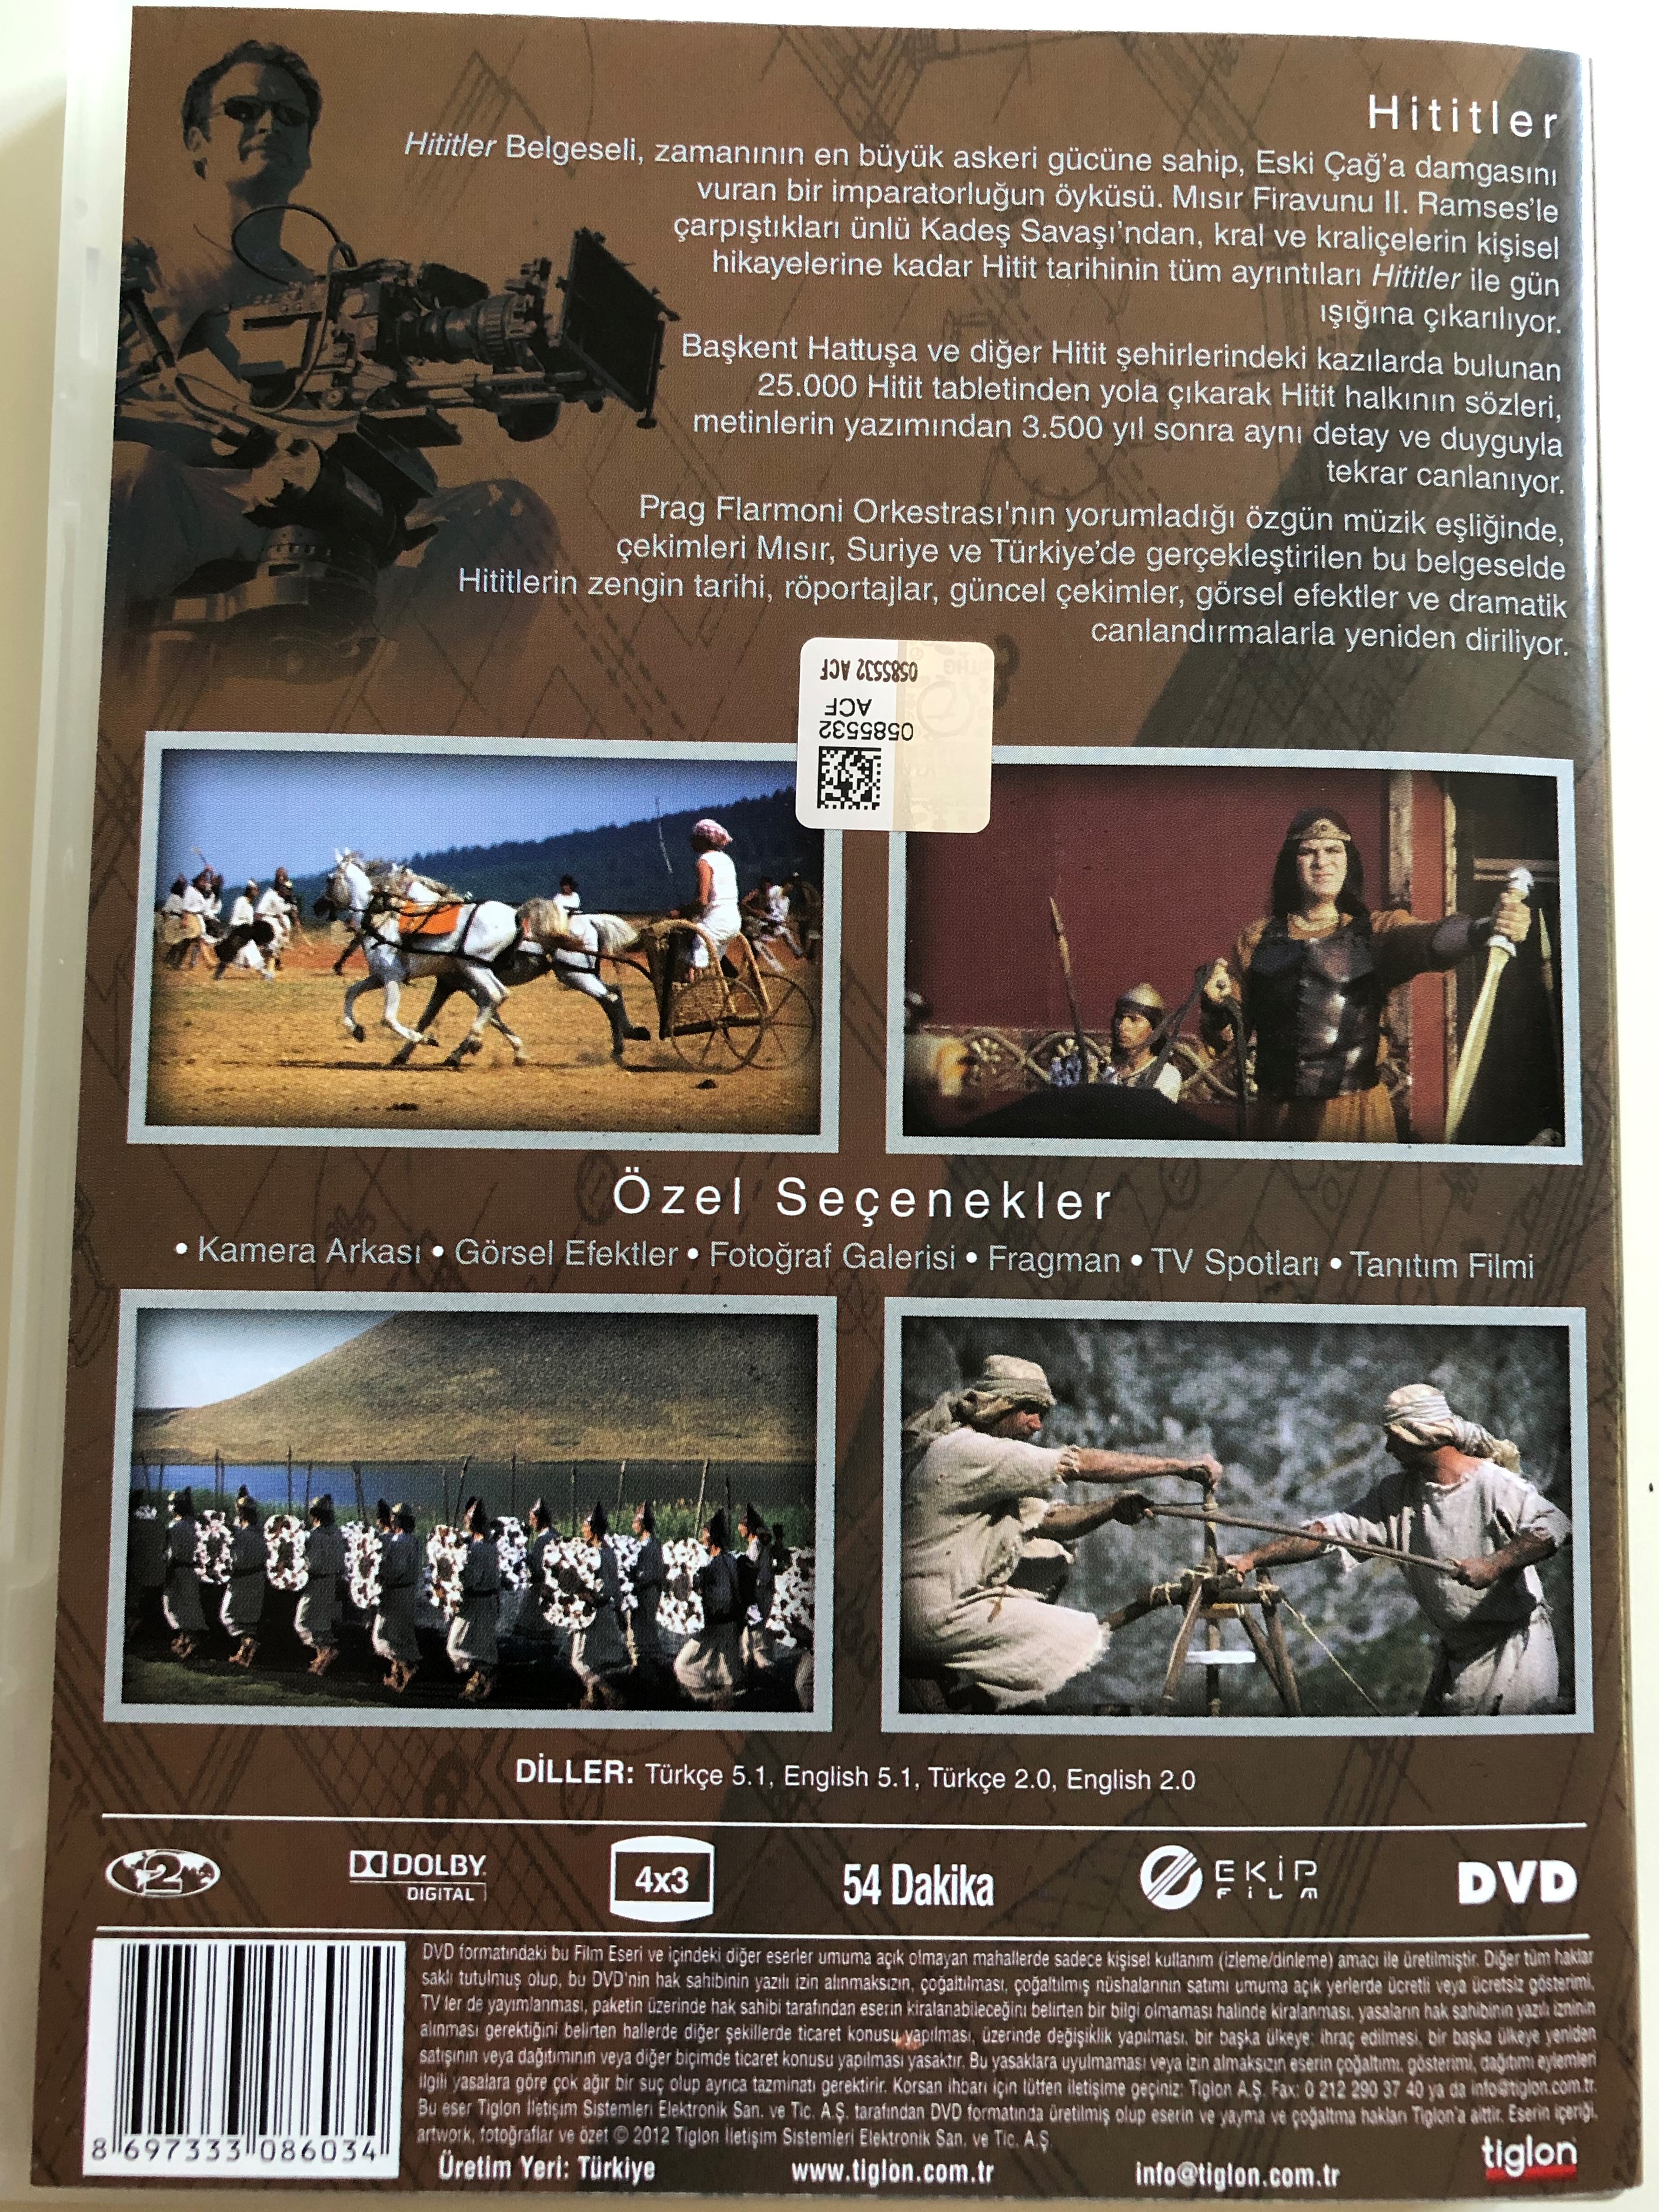 hititler-dvd-2003-the-hittites-directed-by-tolga-rnek-documentary-about-the-rise-and-fall-of-the-hittite-empire-narrated-by-jeremy-irons-2-.jpg